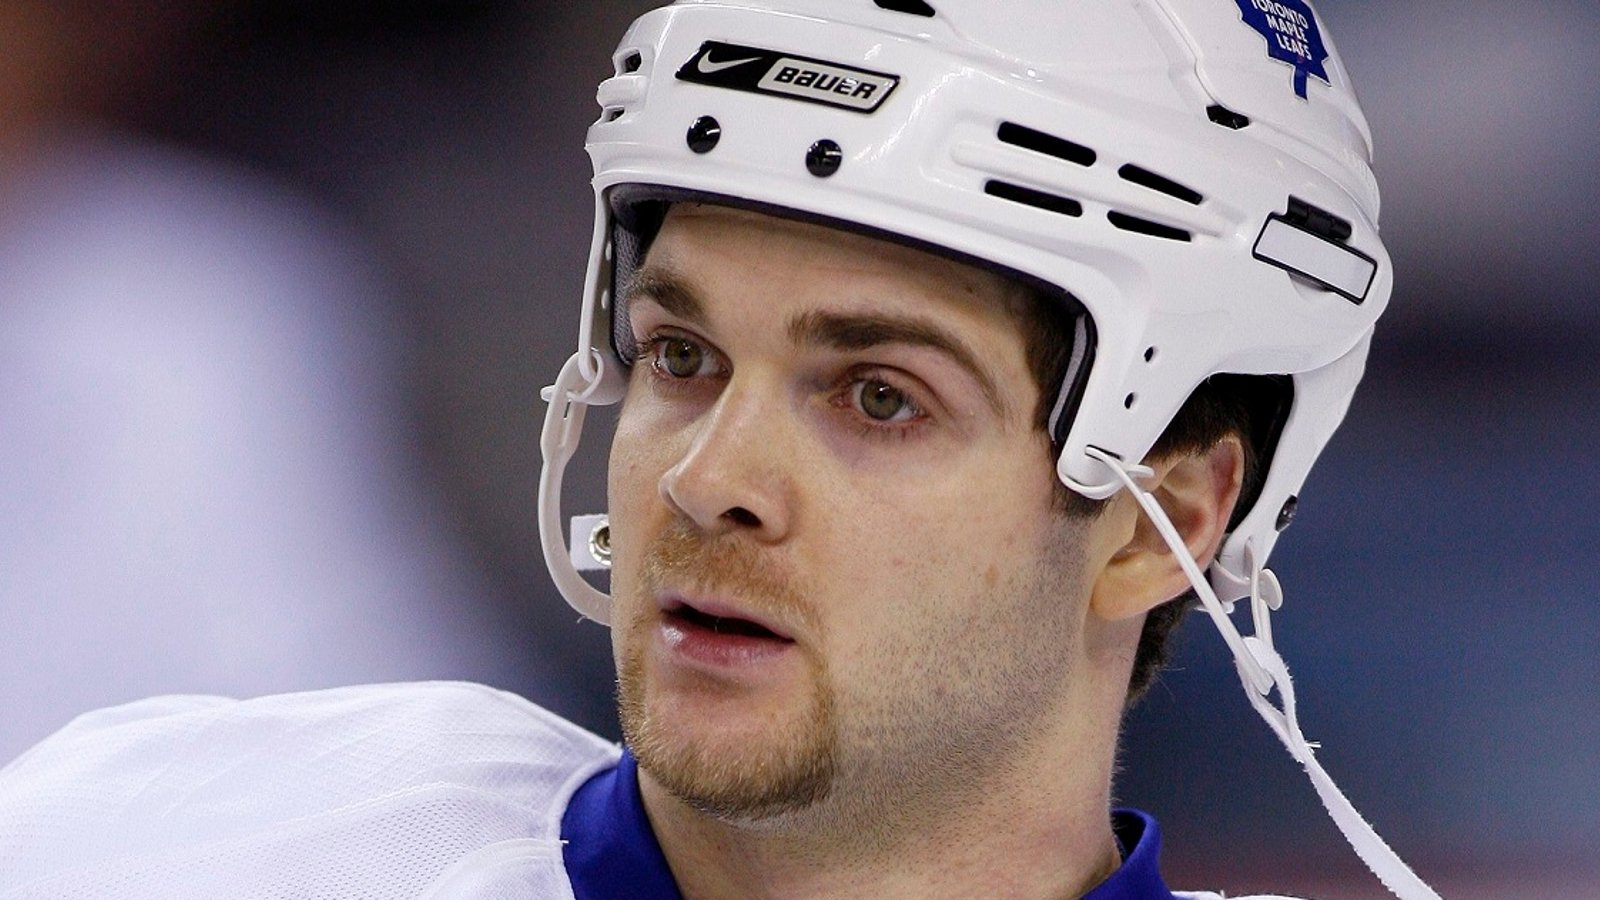 Former NHLer Carlo Colaiacovo shares terrible family tragedy.